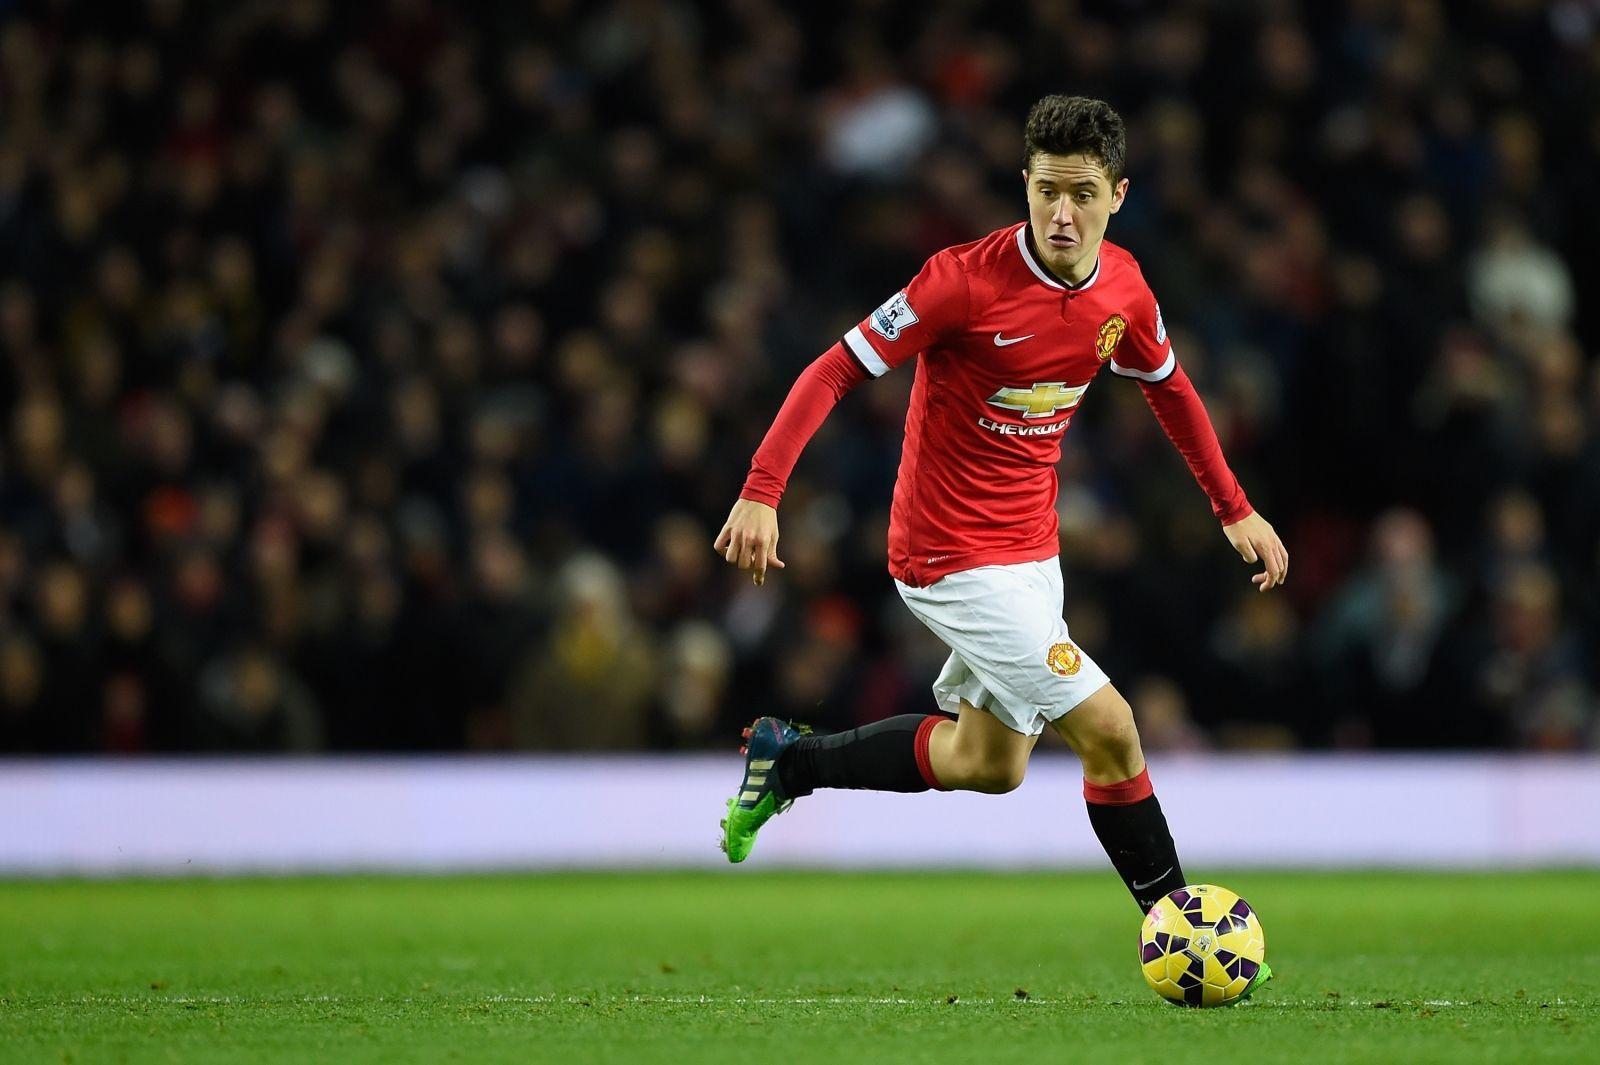 Ander Herrera Match Fixing: Inside Story On Claims That Could Ruin